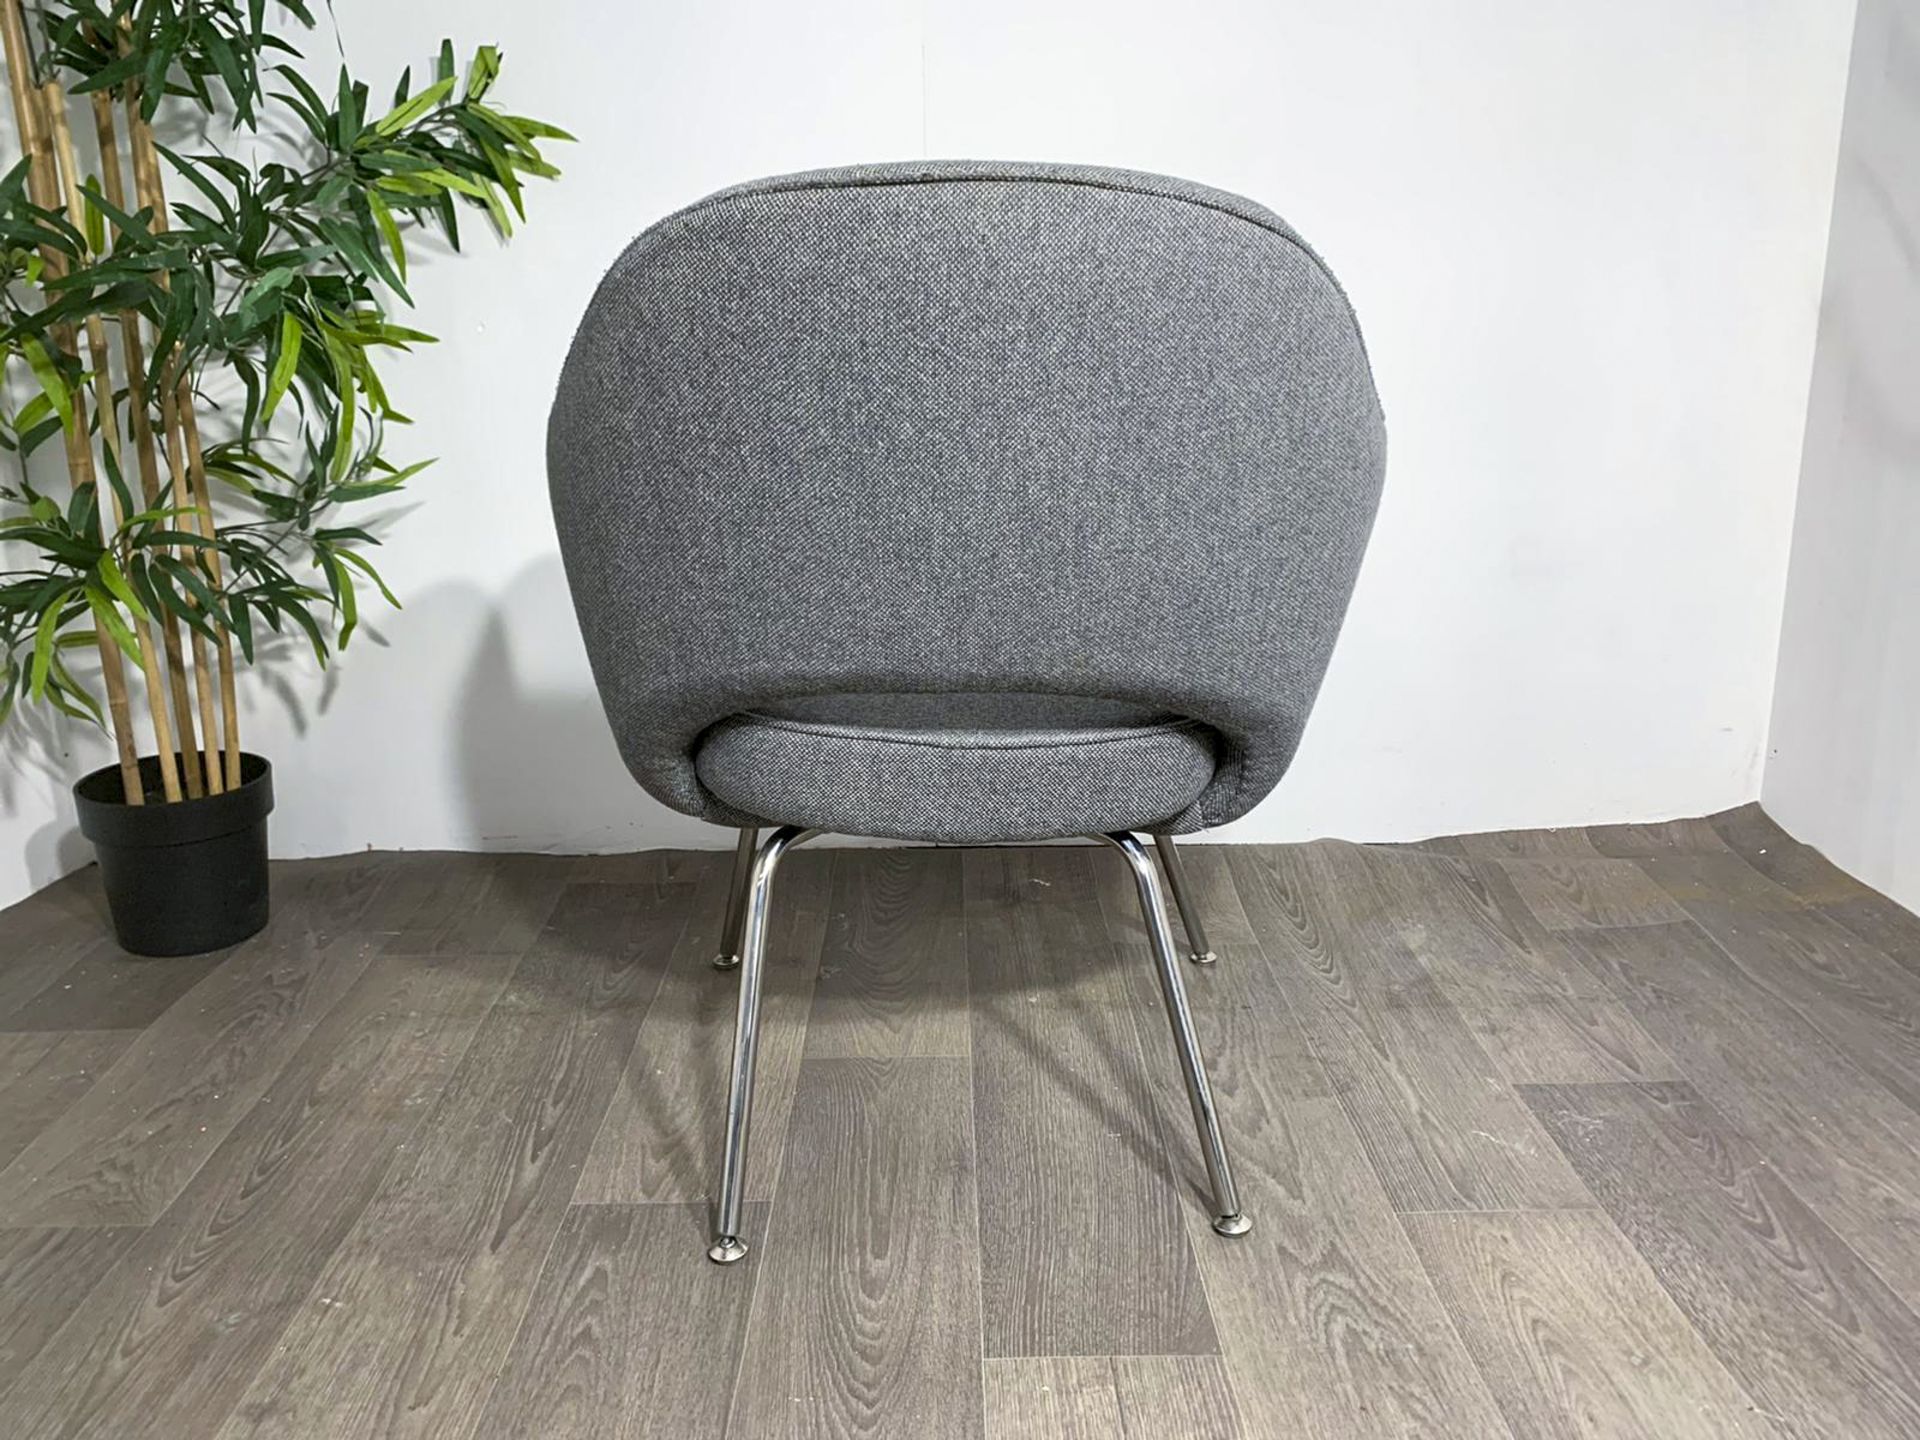 Grey Fabric Commercial Grade Chair with Chrome Legs x2 - Image 2 of 9